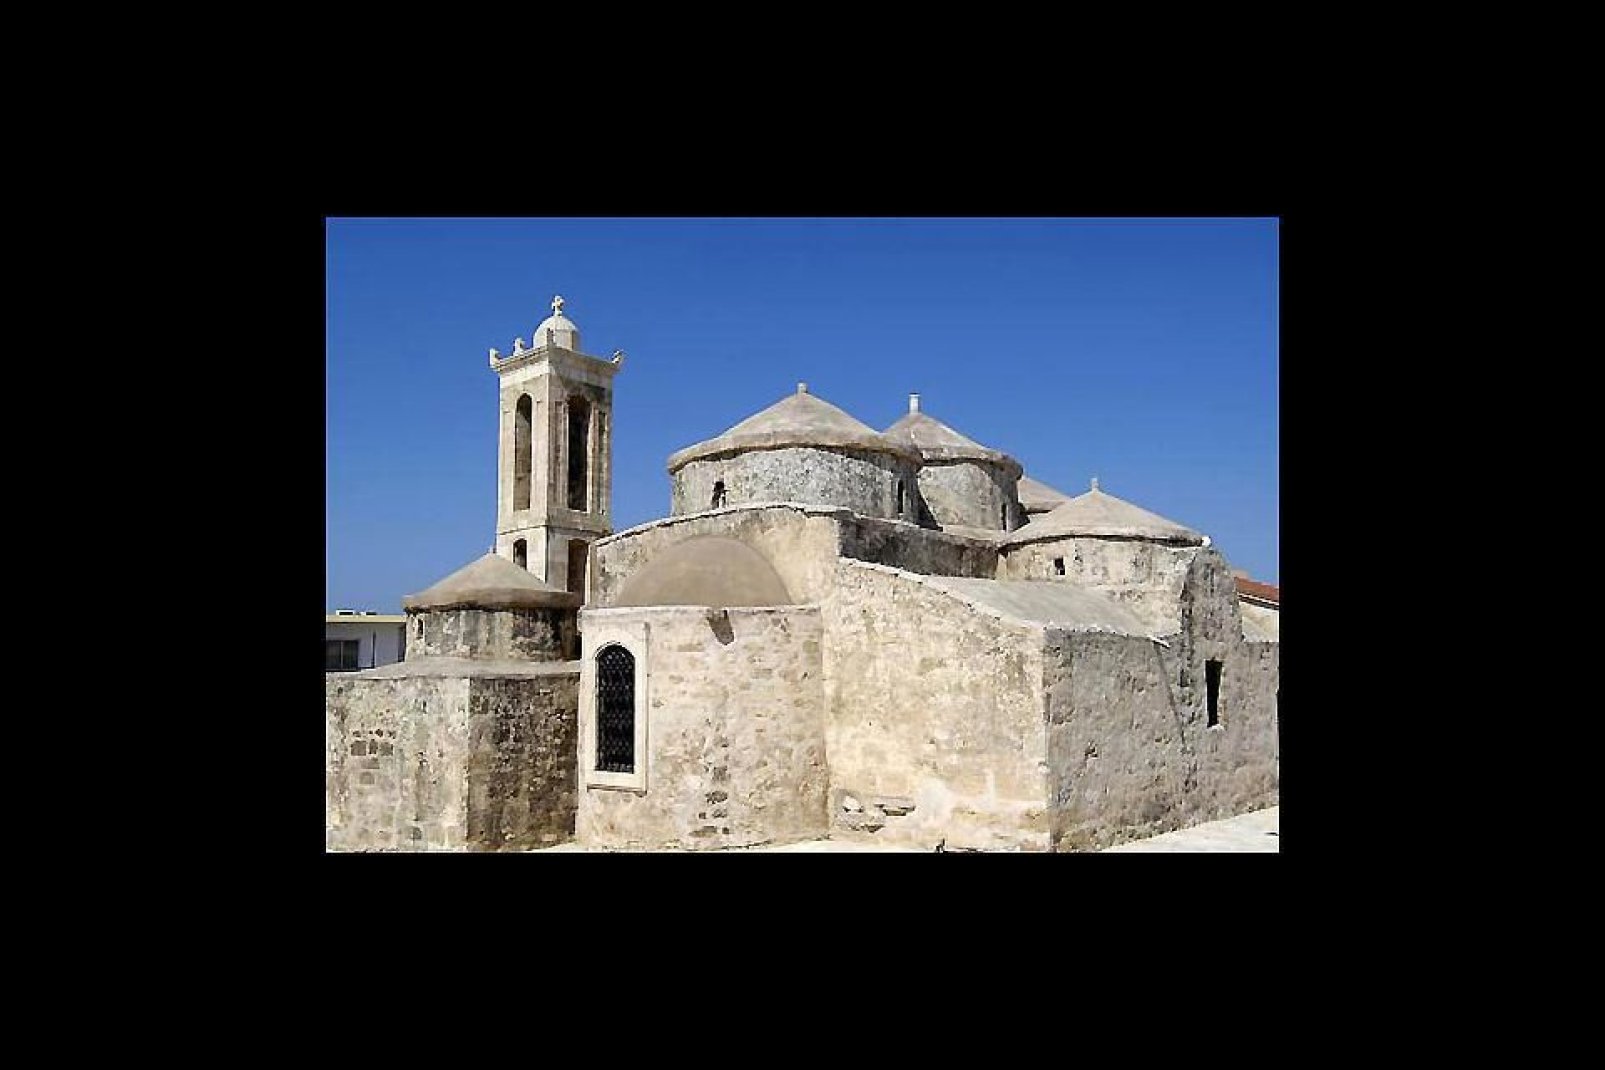 With its 5 domes, the church of Ayia Paraskevi was constructed in the style of the Justinian basilicas.